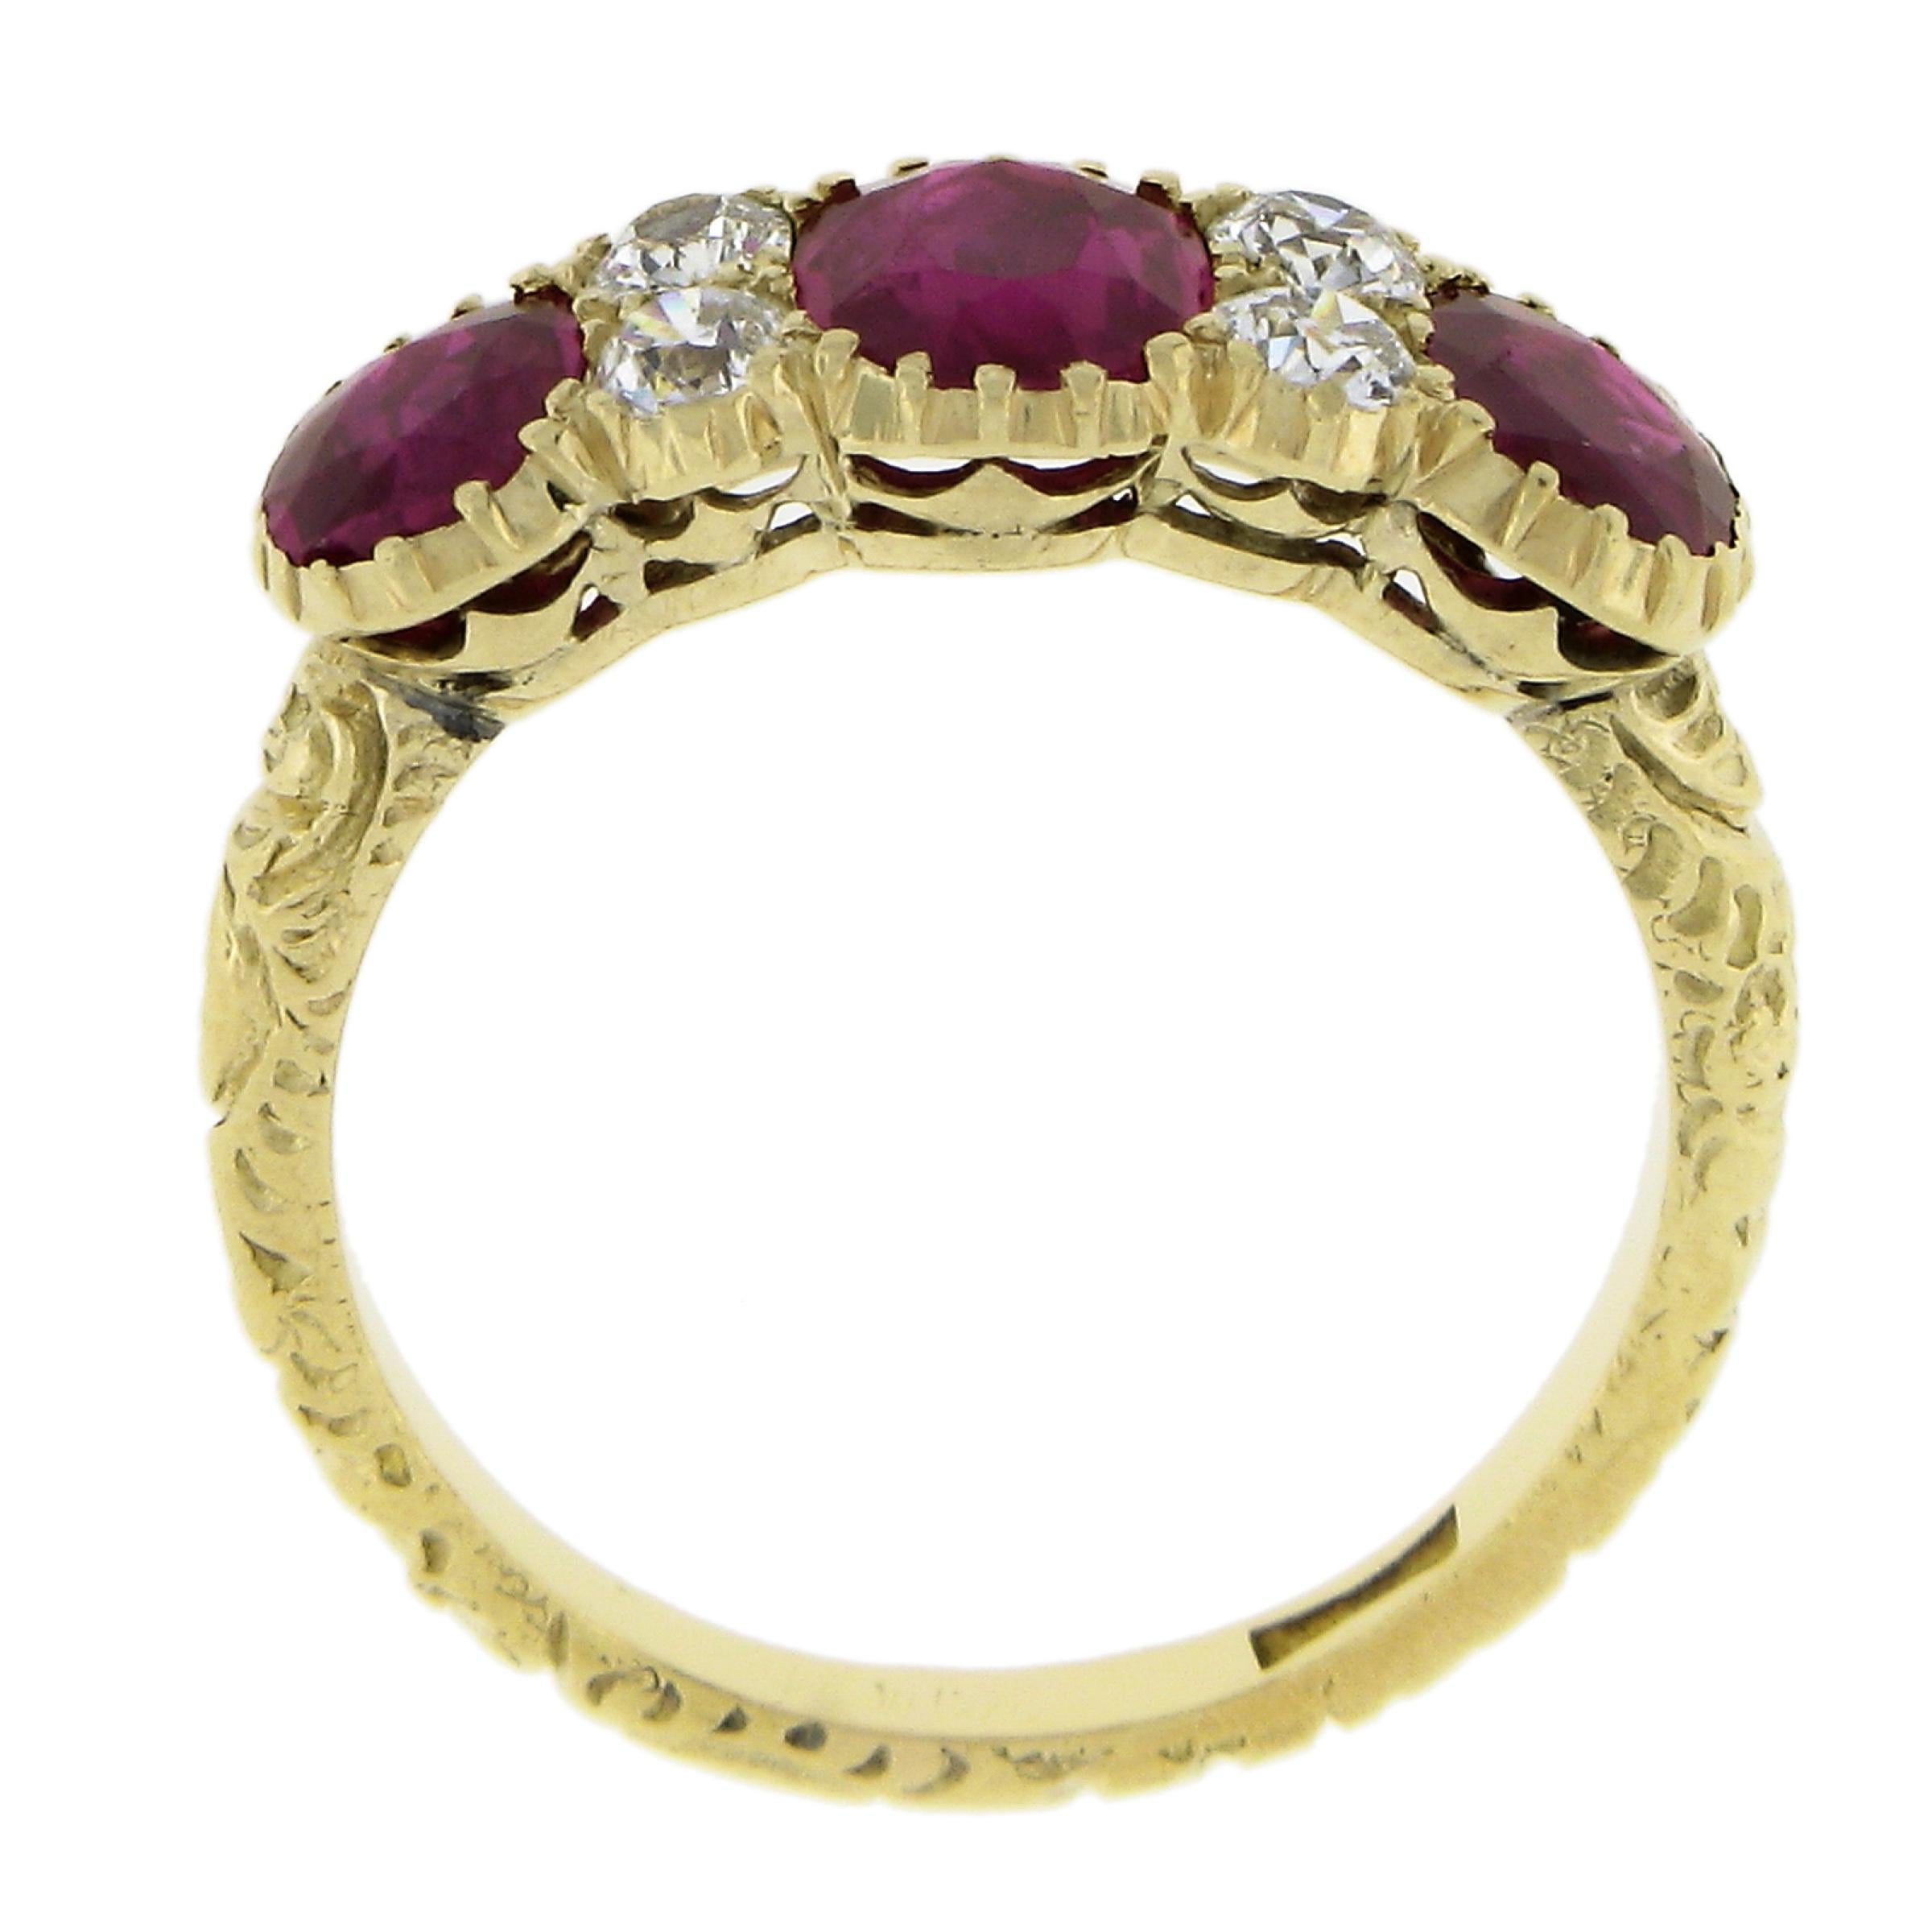 Antique 18k Gold 1.78ct GIA Oval Burma Ruby Old Diamond Scroll Work Band Ring For Sale 2